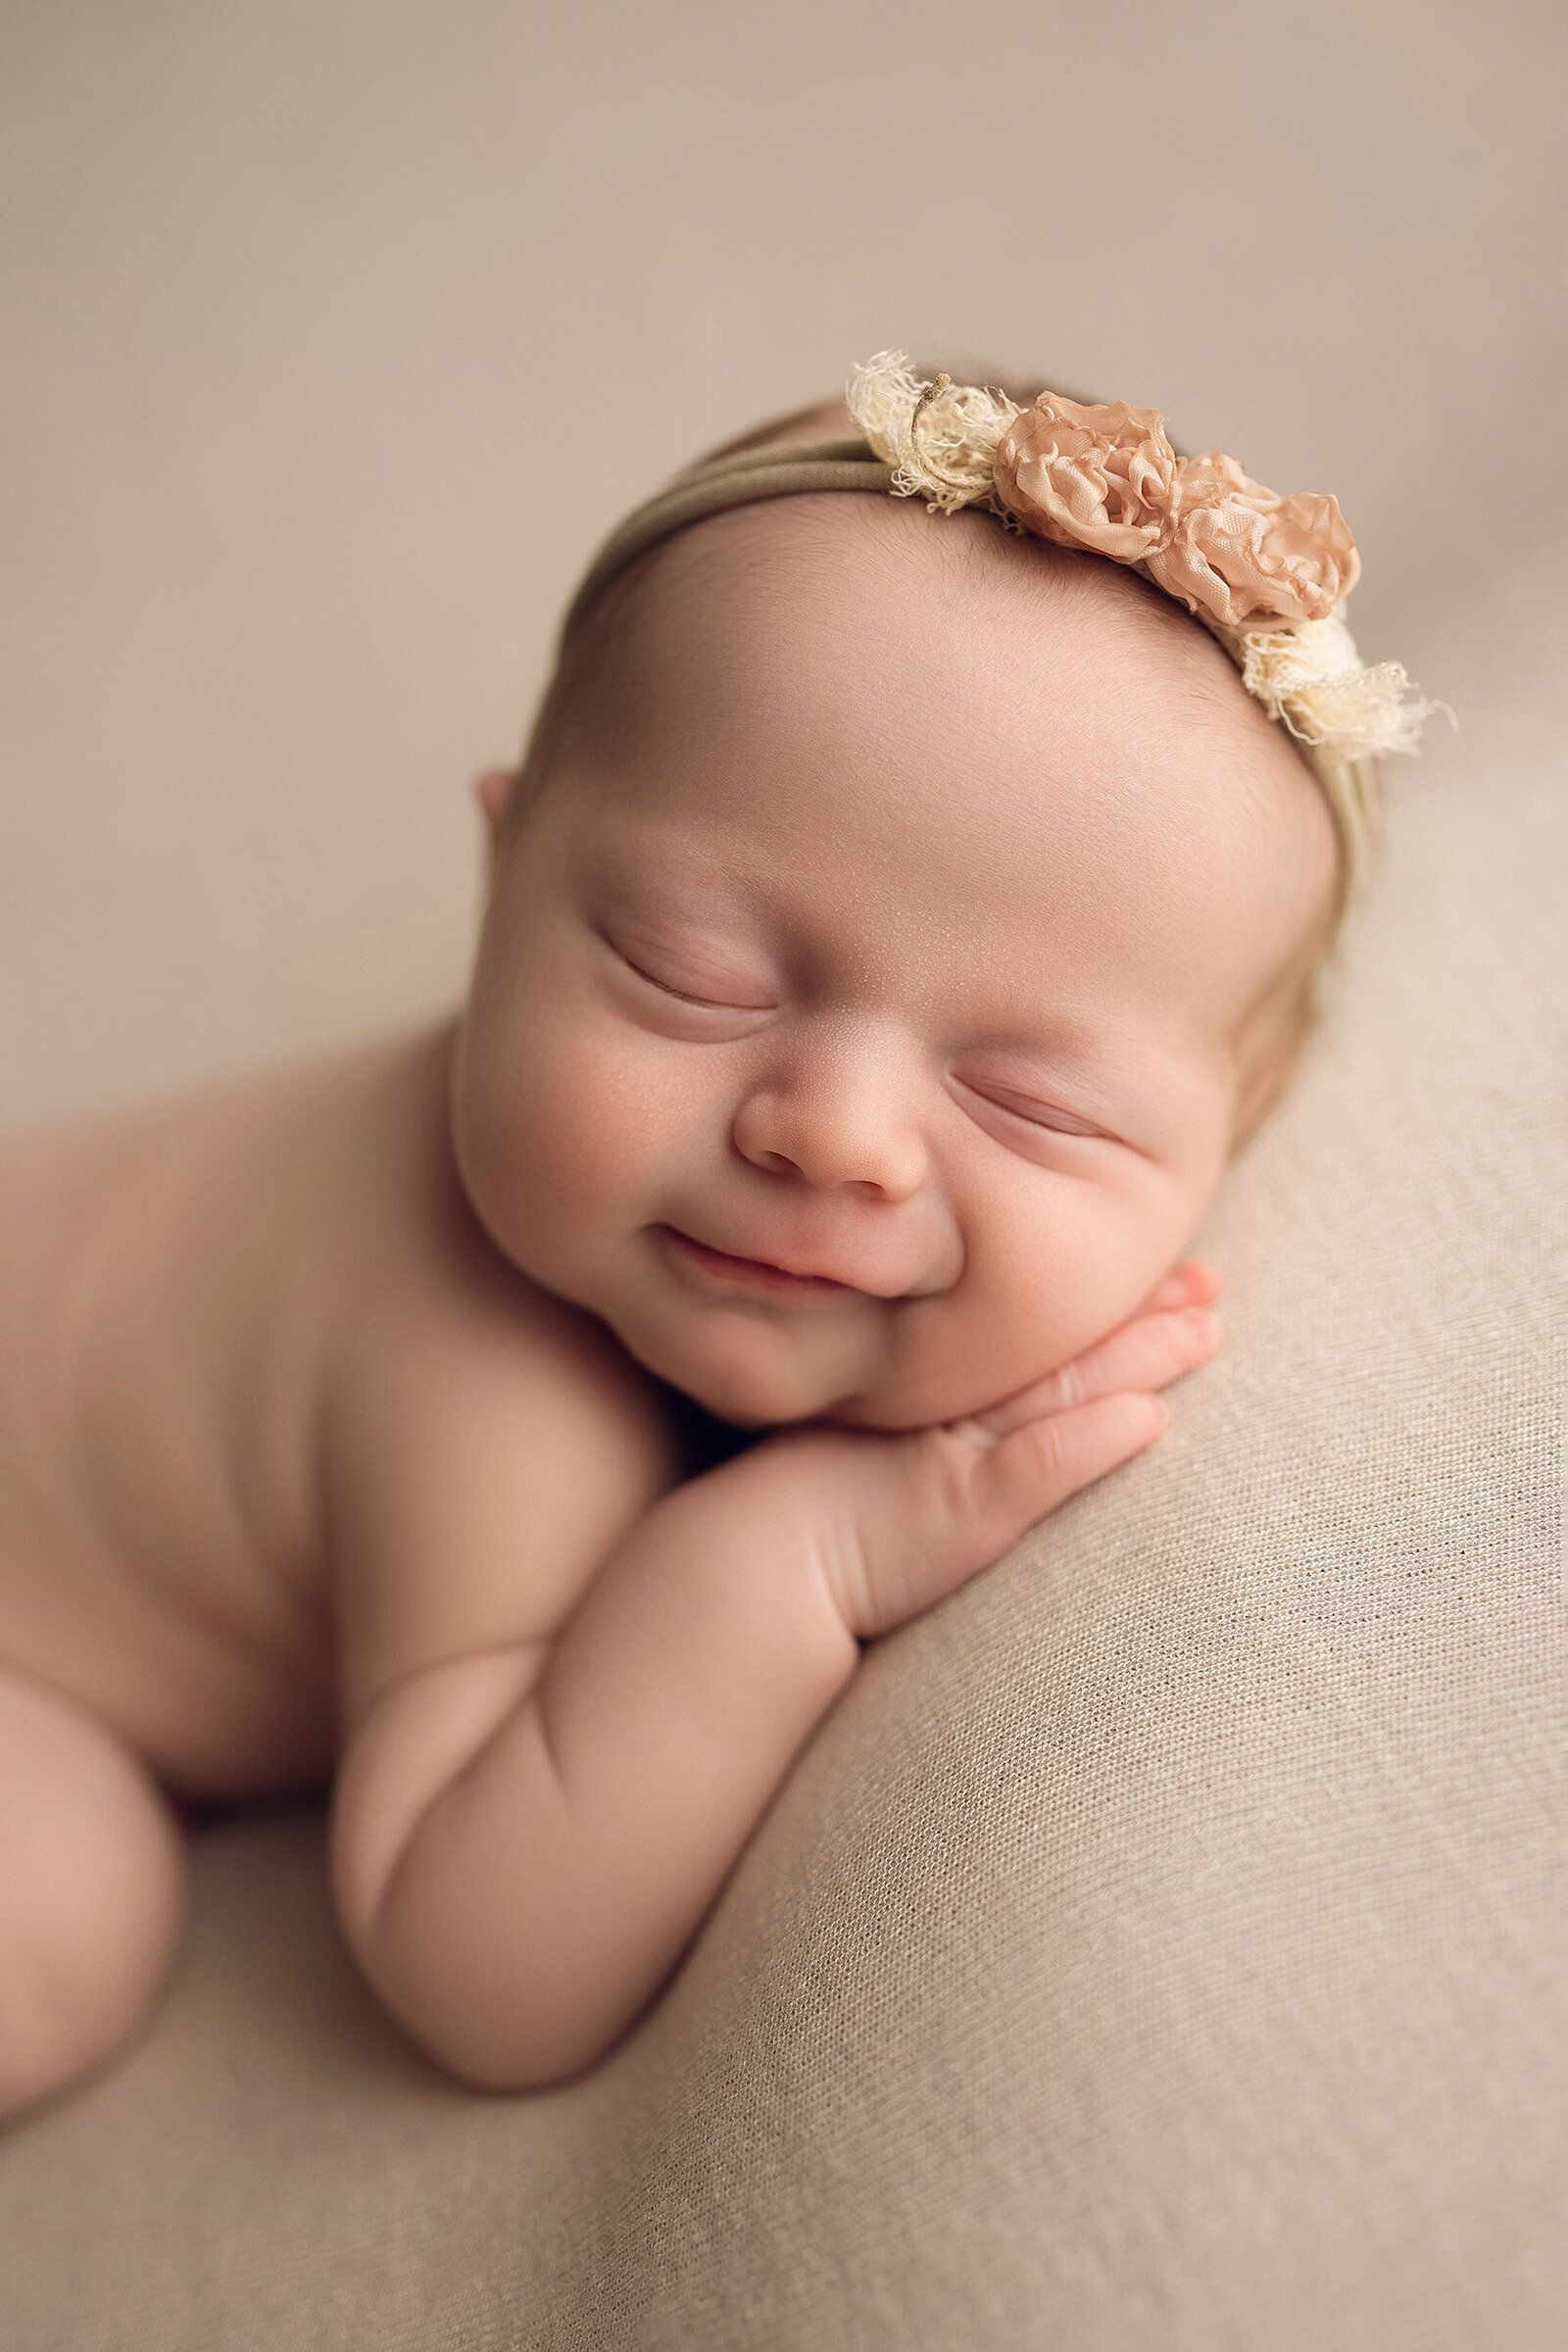 A Caucasian baby lays on a tan blanket and smiles with her eyes closed.